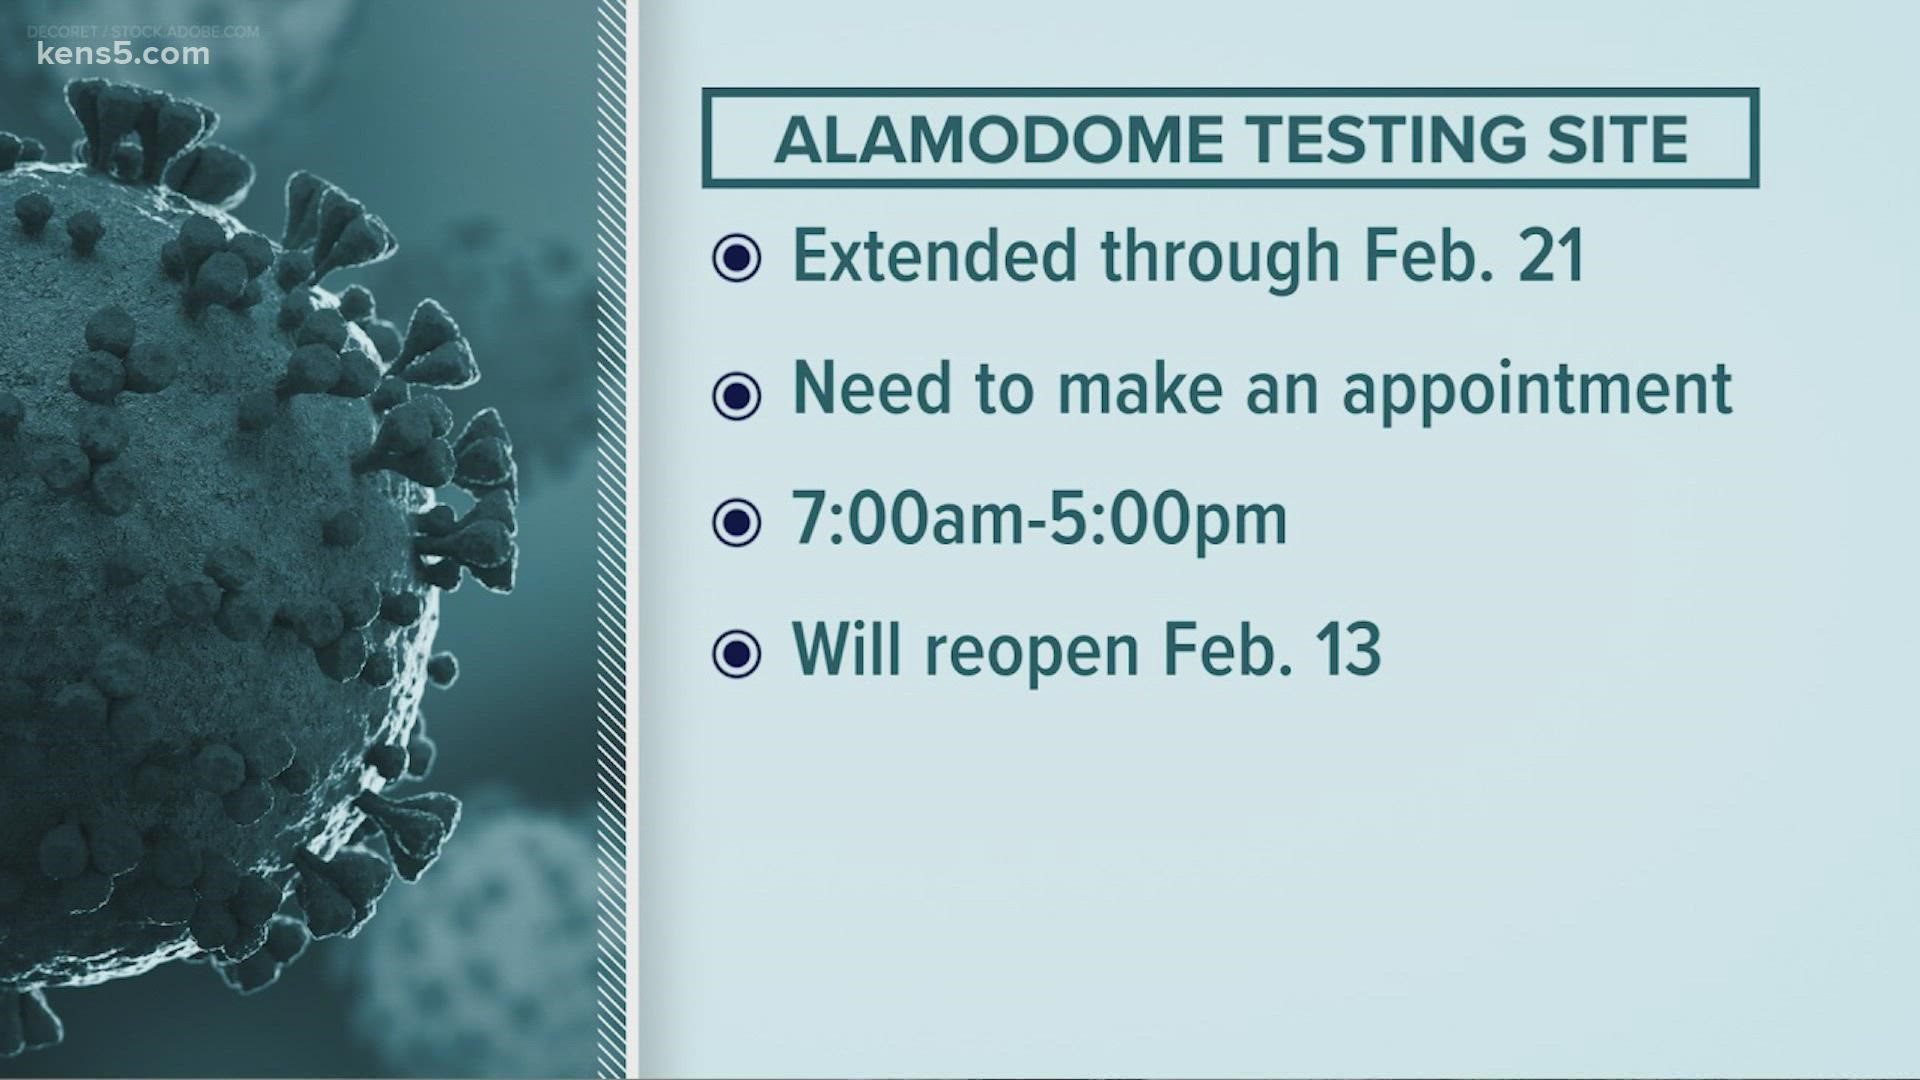 Metro Health says the wait times and lines are a lot shorter at the Alamodome testing locations. The testing site will now close on Feb. 21.